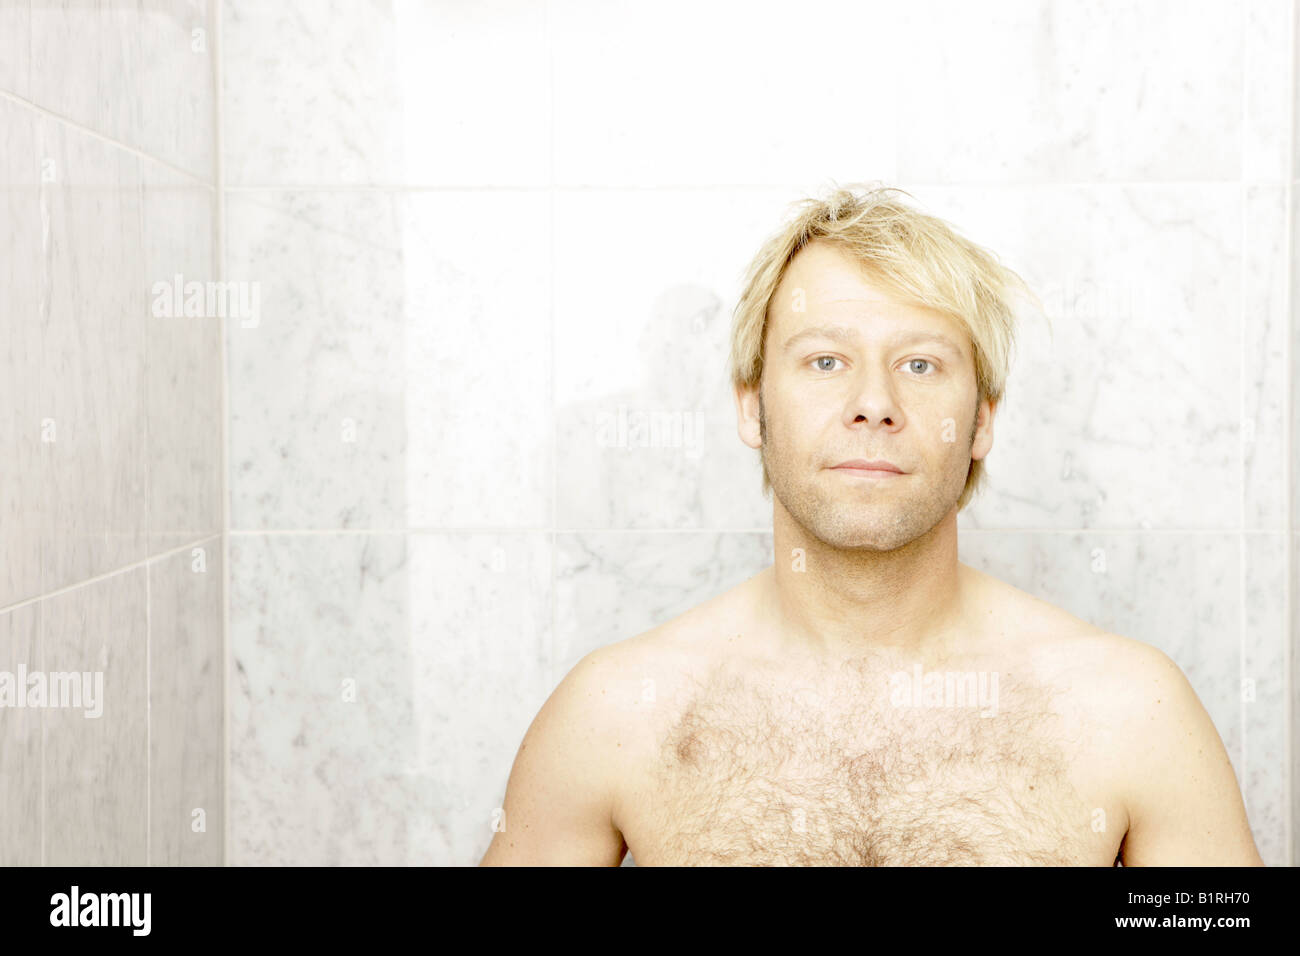 Blonde man in the shower Stock Photo